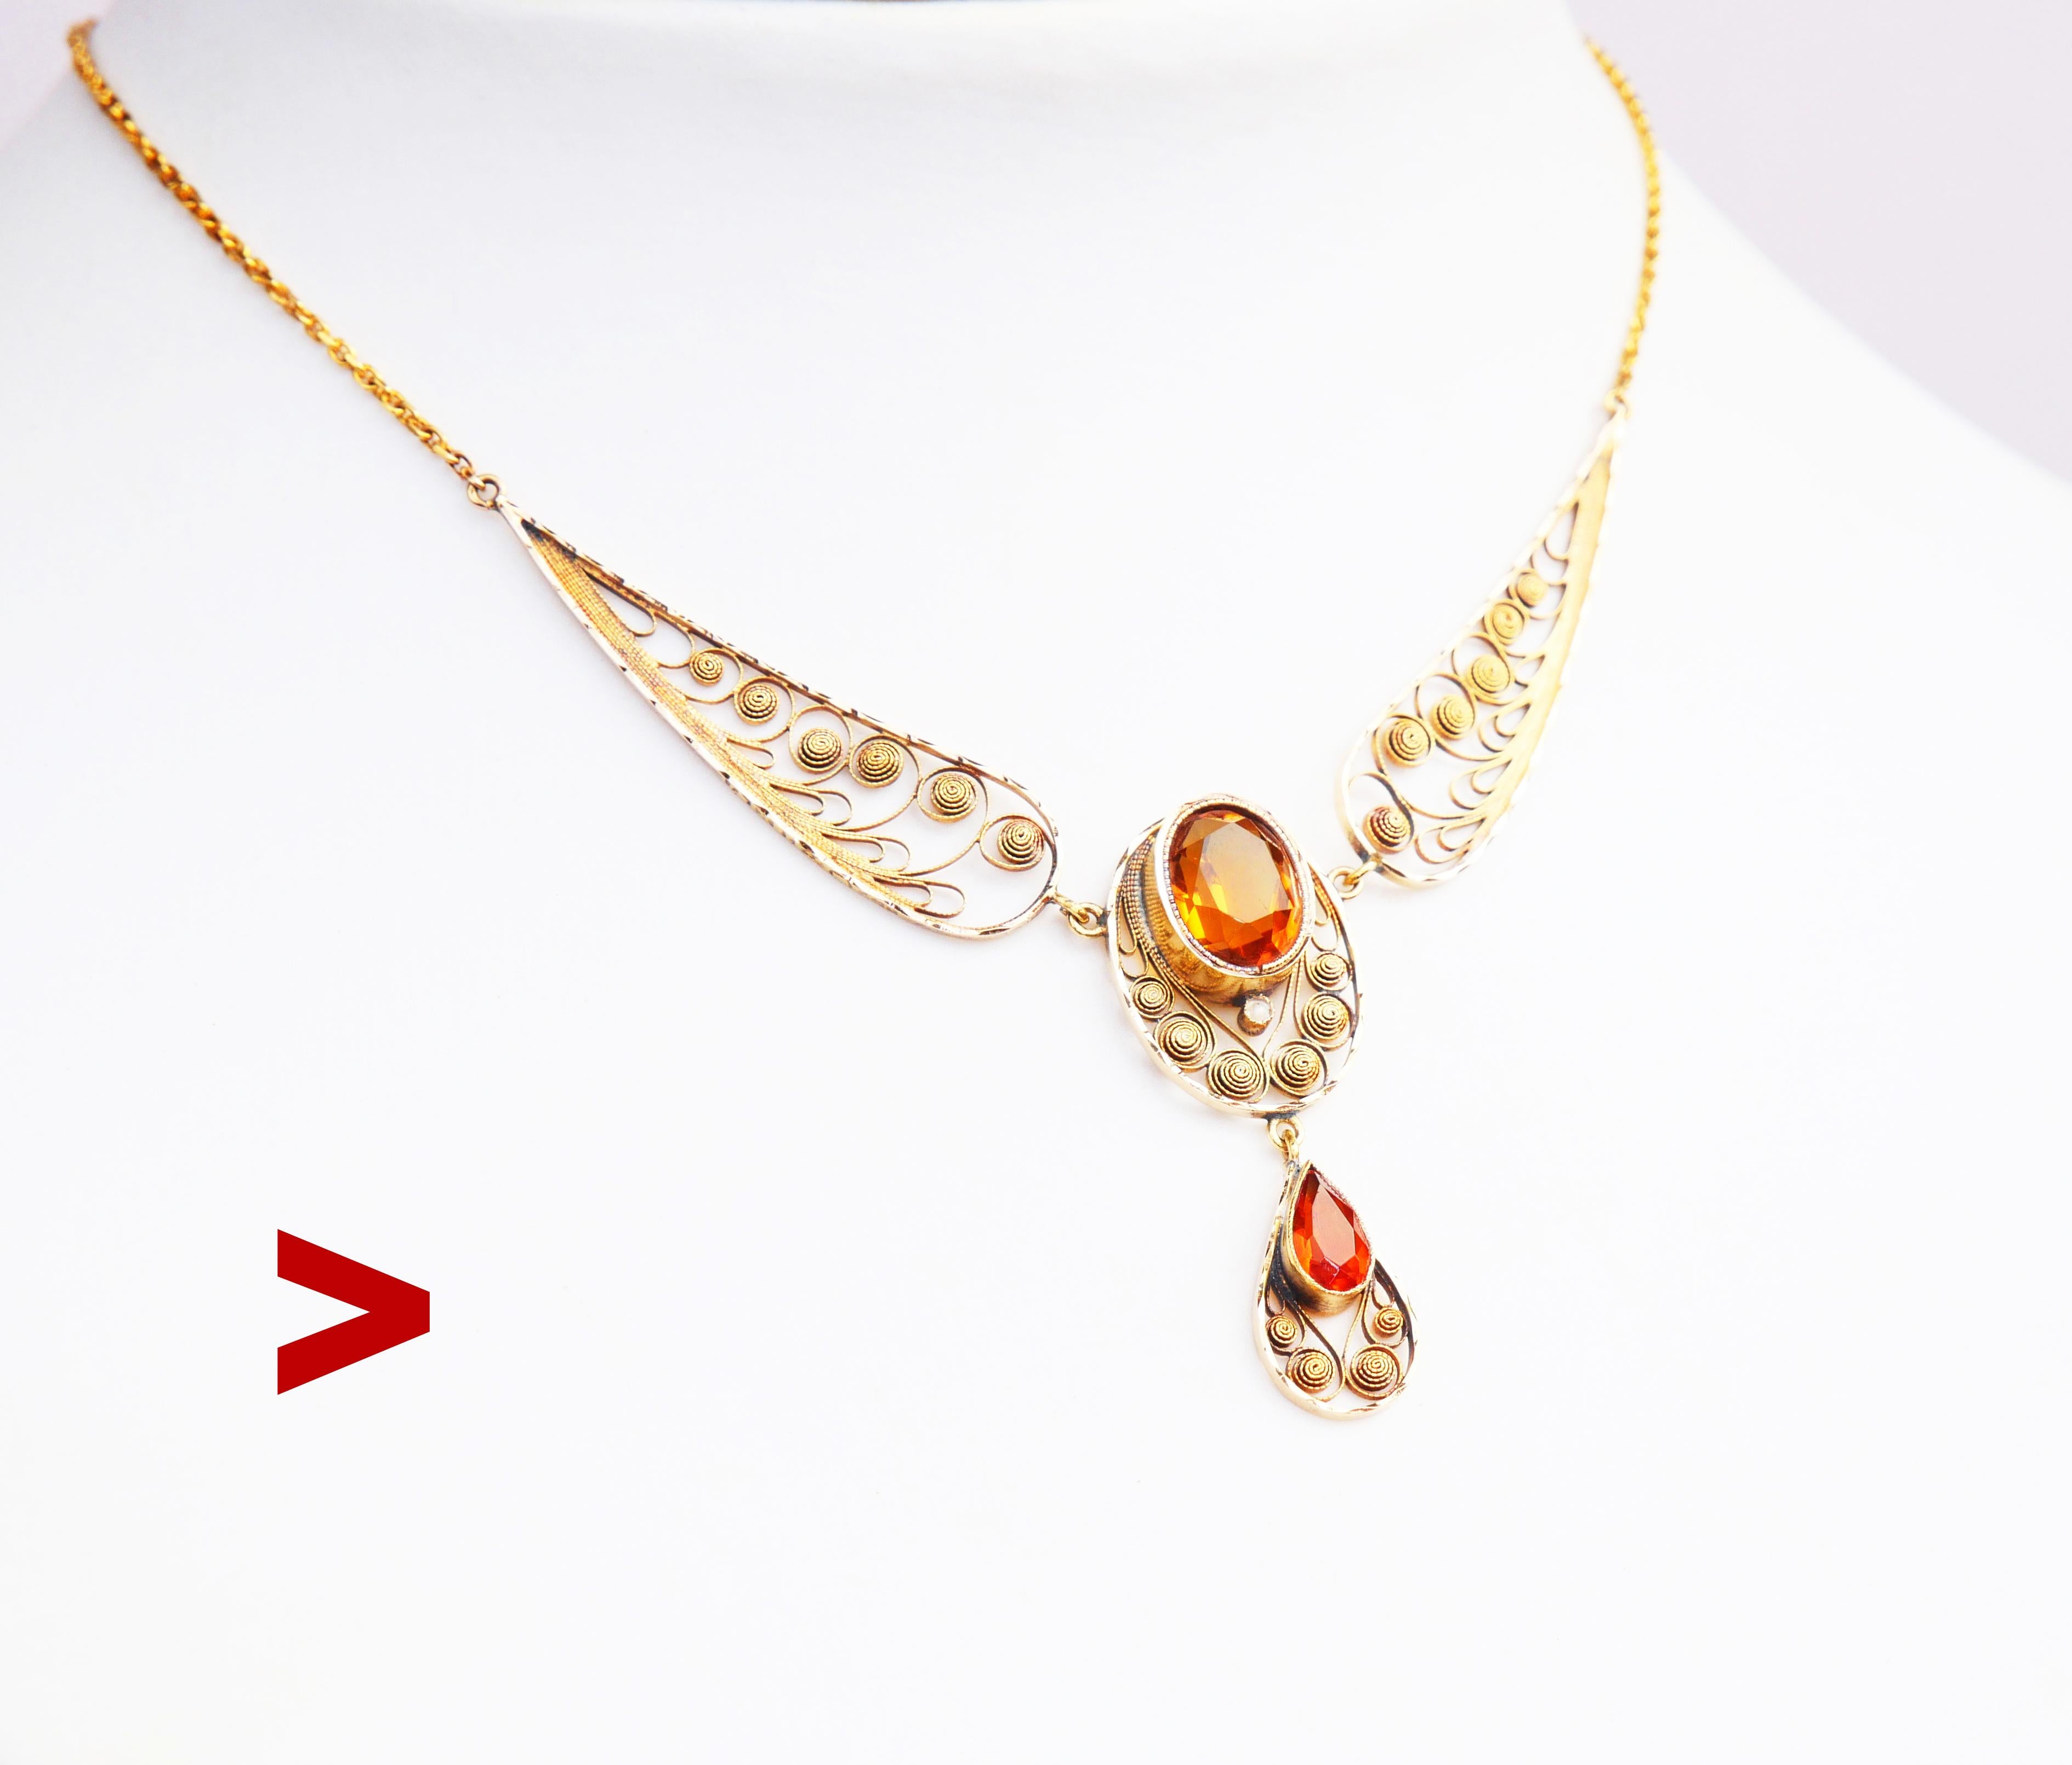 Antique hand-made Swedish necklace in solid 18K Yellow Gold. Delicate filigree work, oval and drop cut natural Citrine stones accented with tiny Seed Pearl.

The Citrines of Orange / Cognac color :  oval cut Citrine stone is 10 mm x 8 mm x 5 mm/